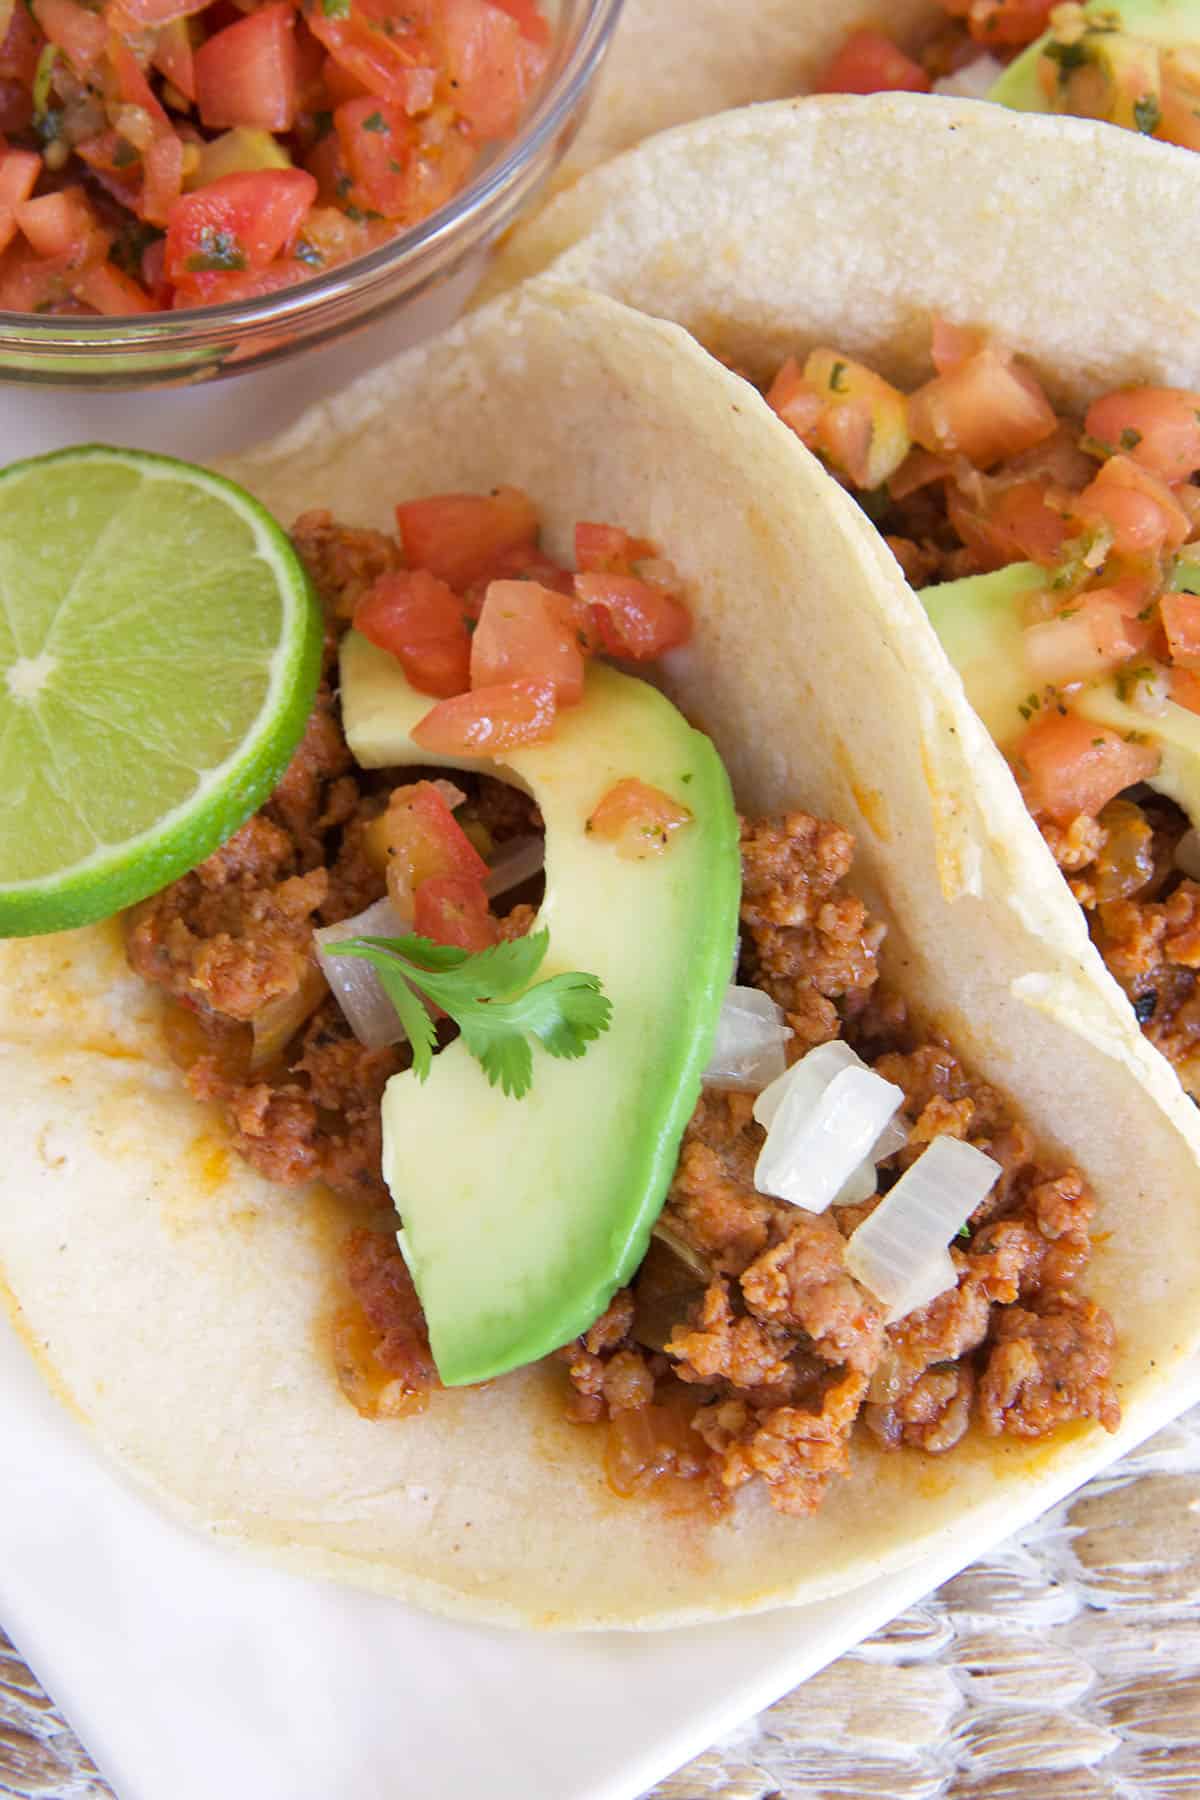 Avocado, tomatoes, and onions and limes are placed on top of a taco.